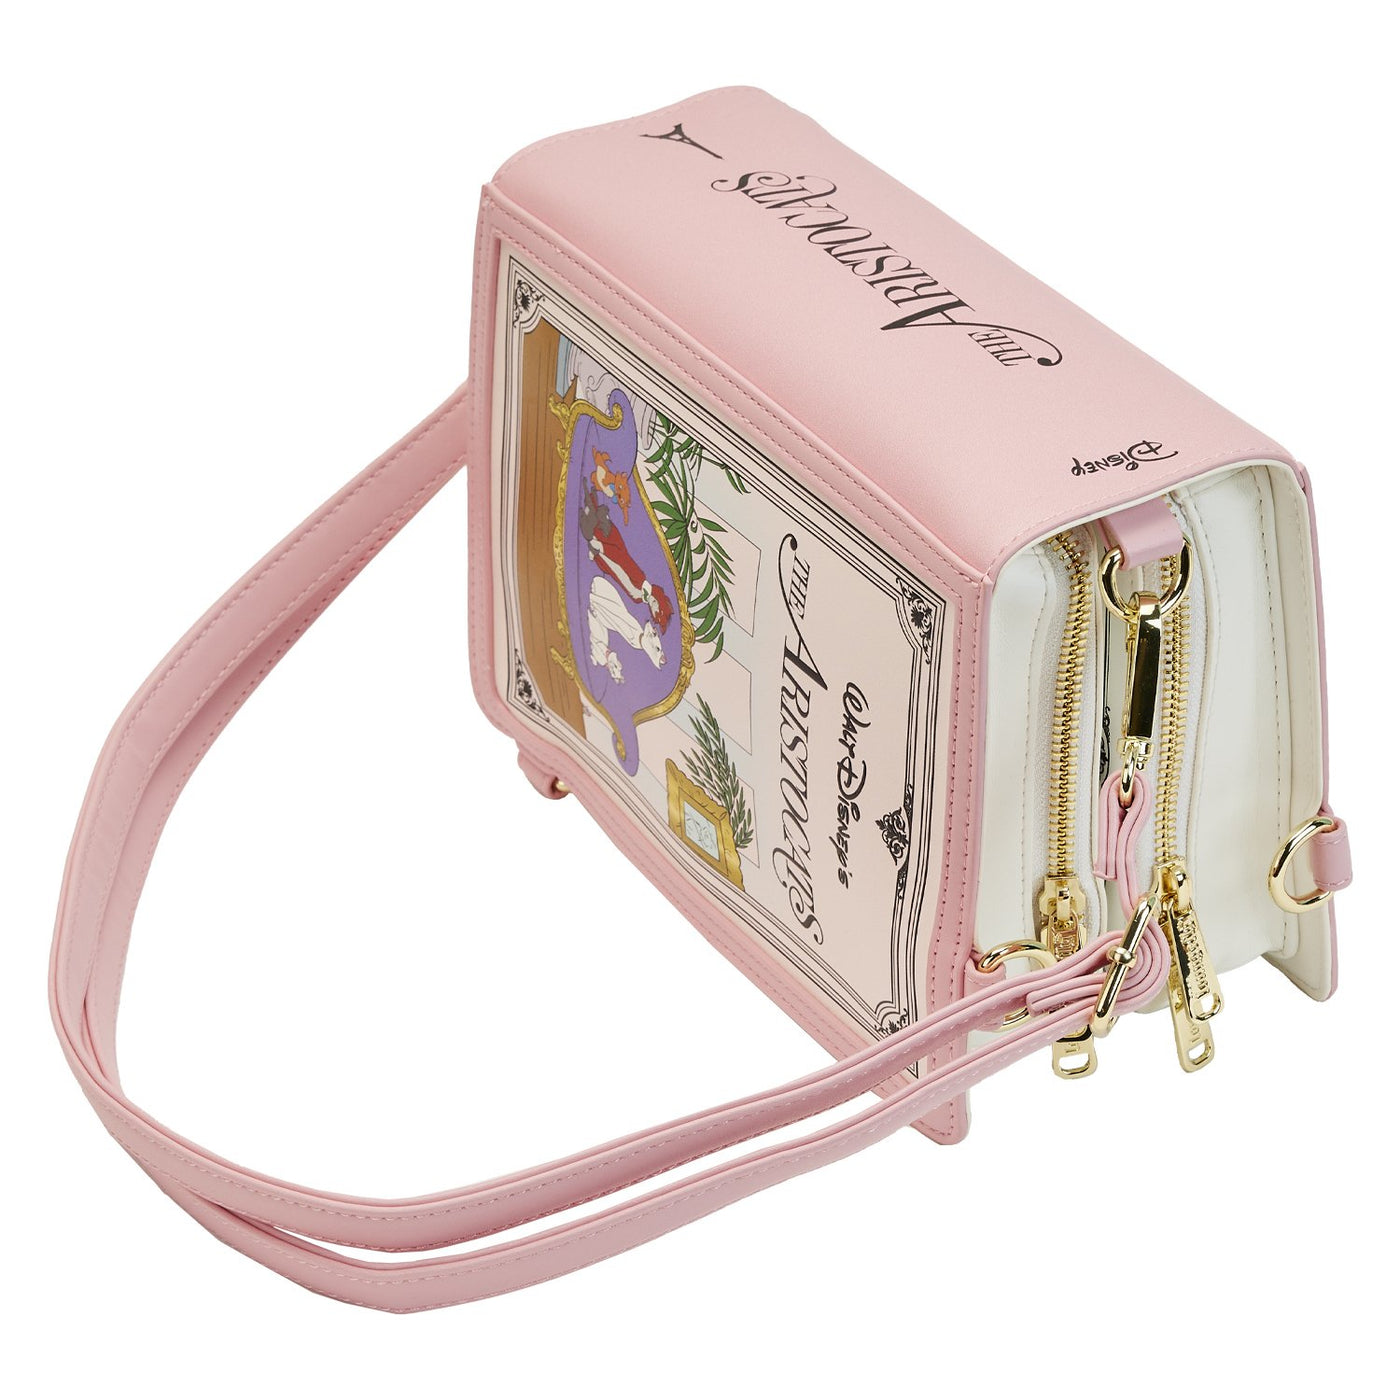 671803455214 - Loungefly Disney The Aristocats Classic Book Convertible Crossbody - Top View